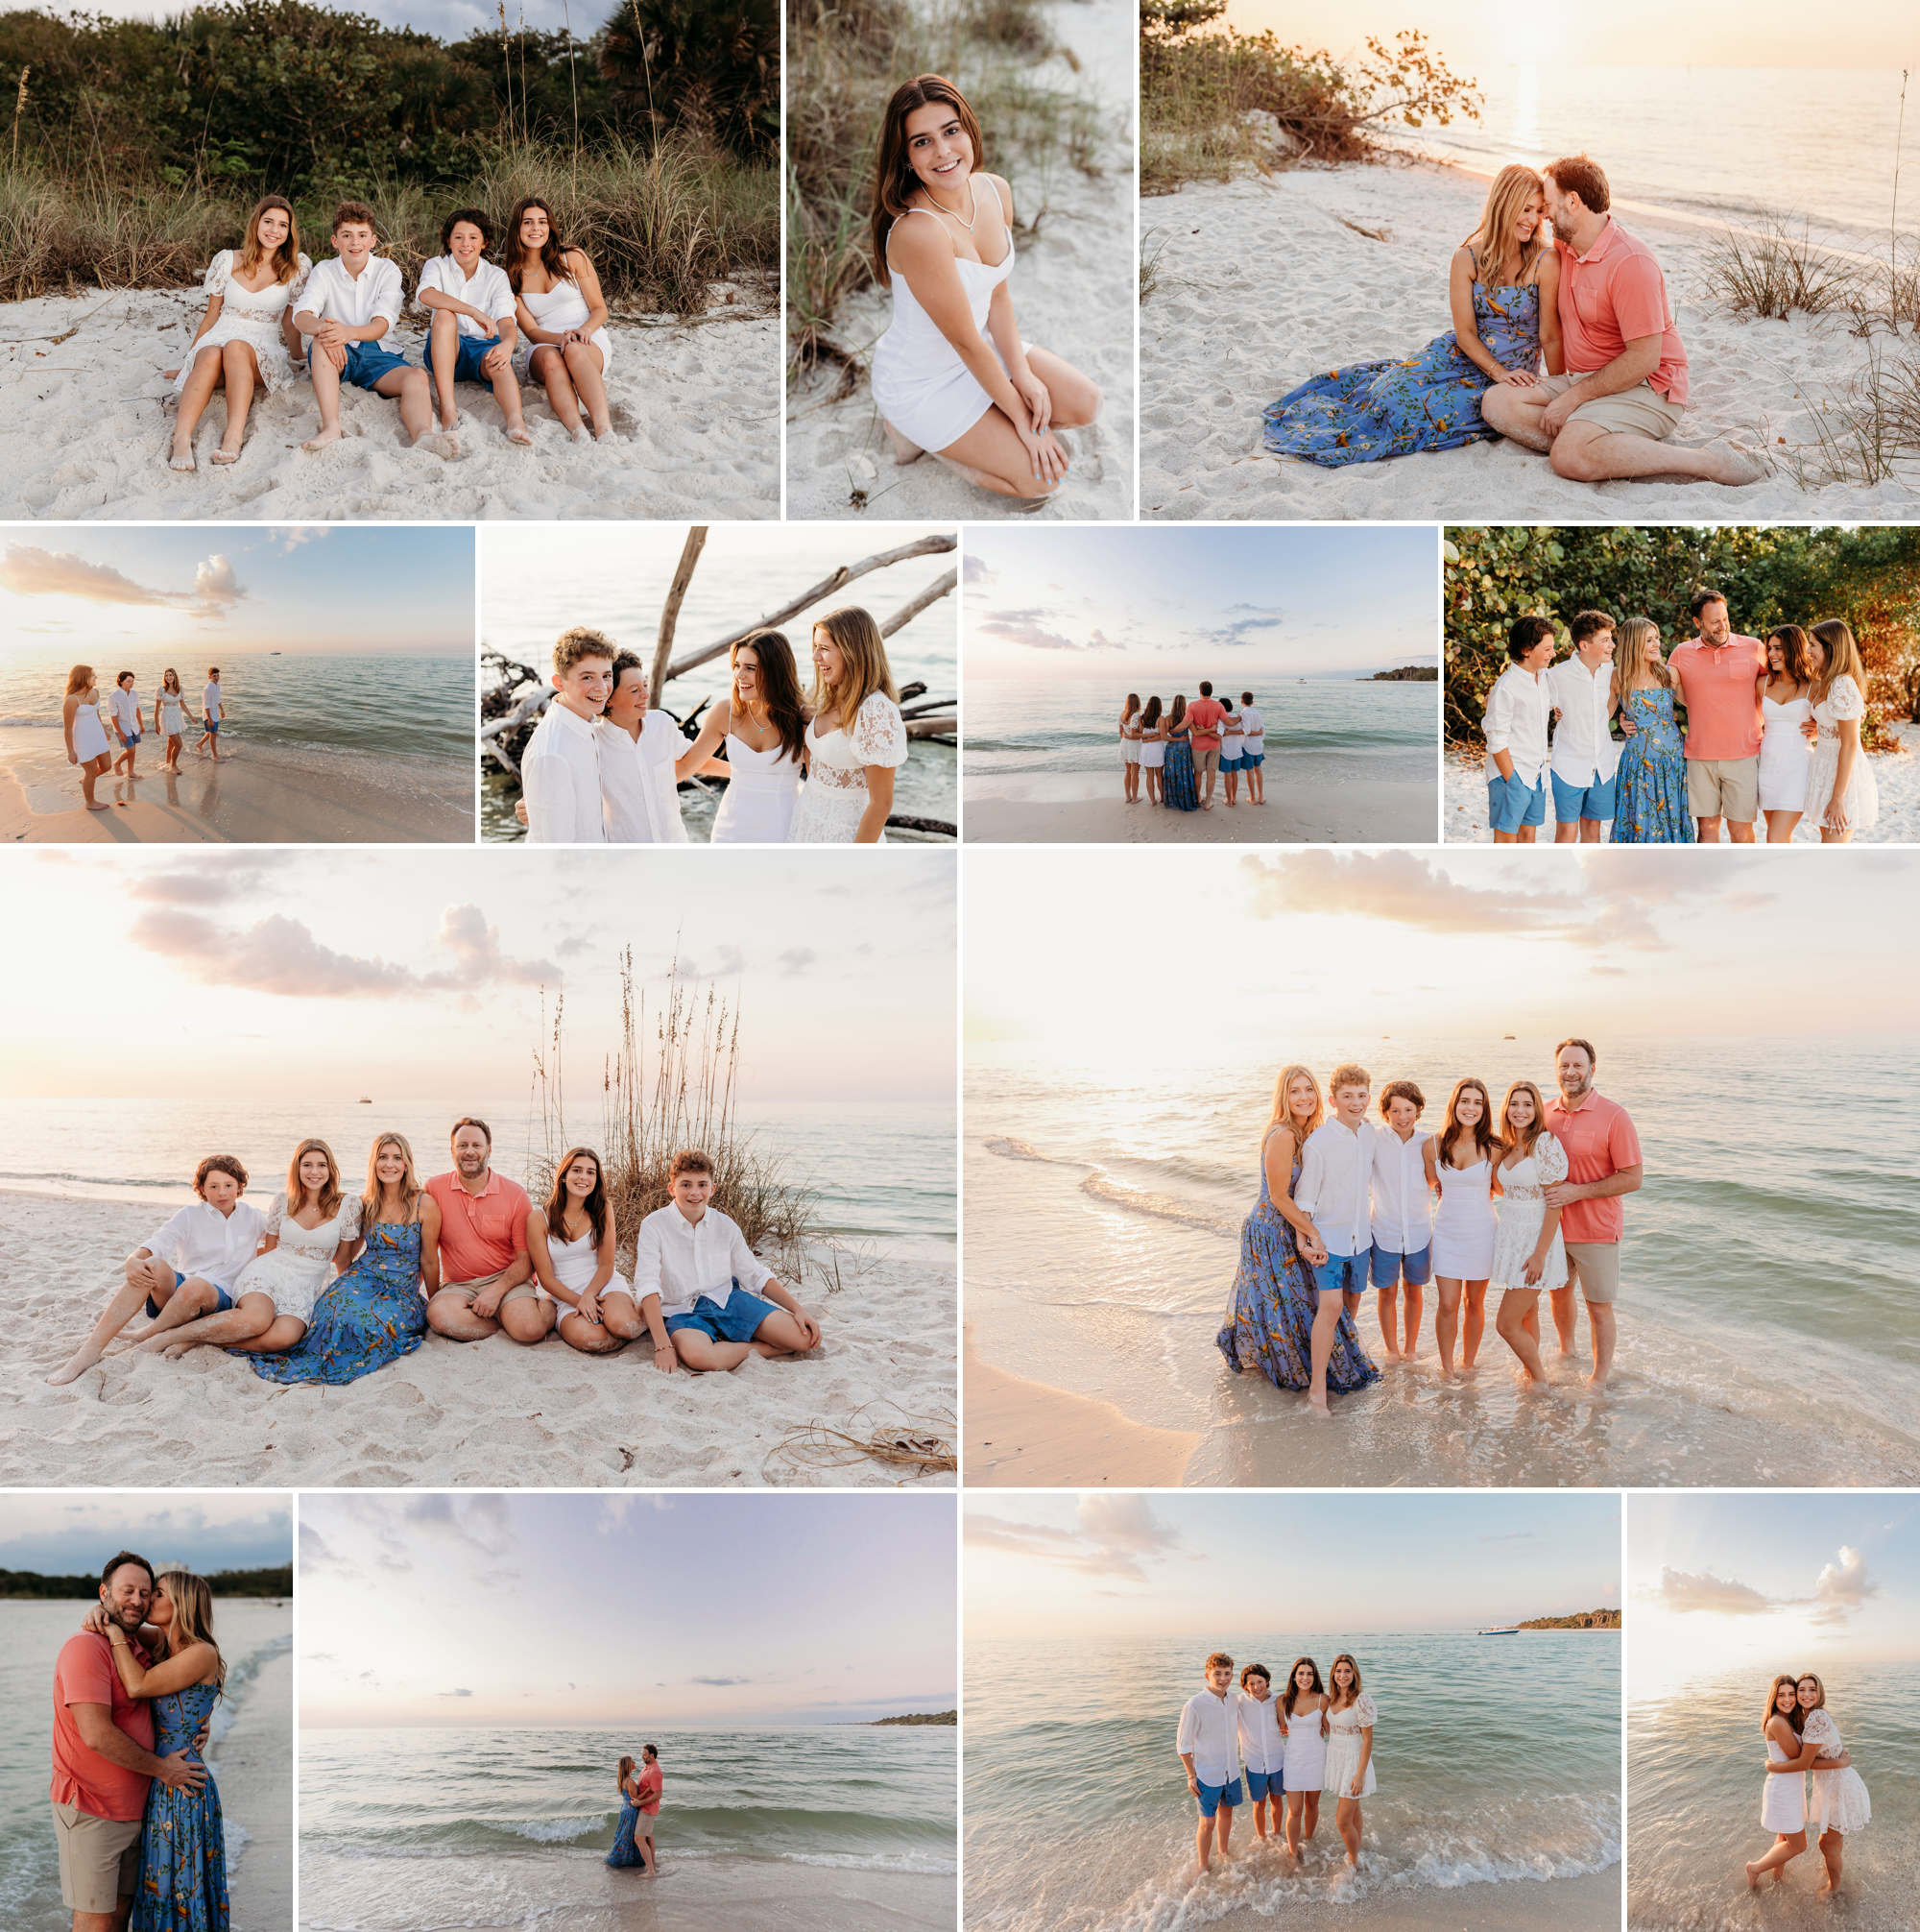 A blended family shoots portraits on the beach while on vacation in Florida. The Naples state park makes the perfect backdrop.